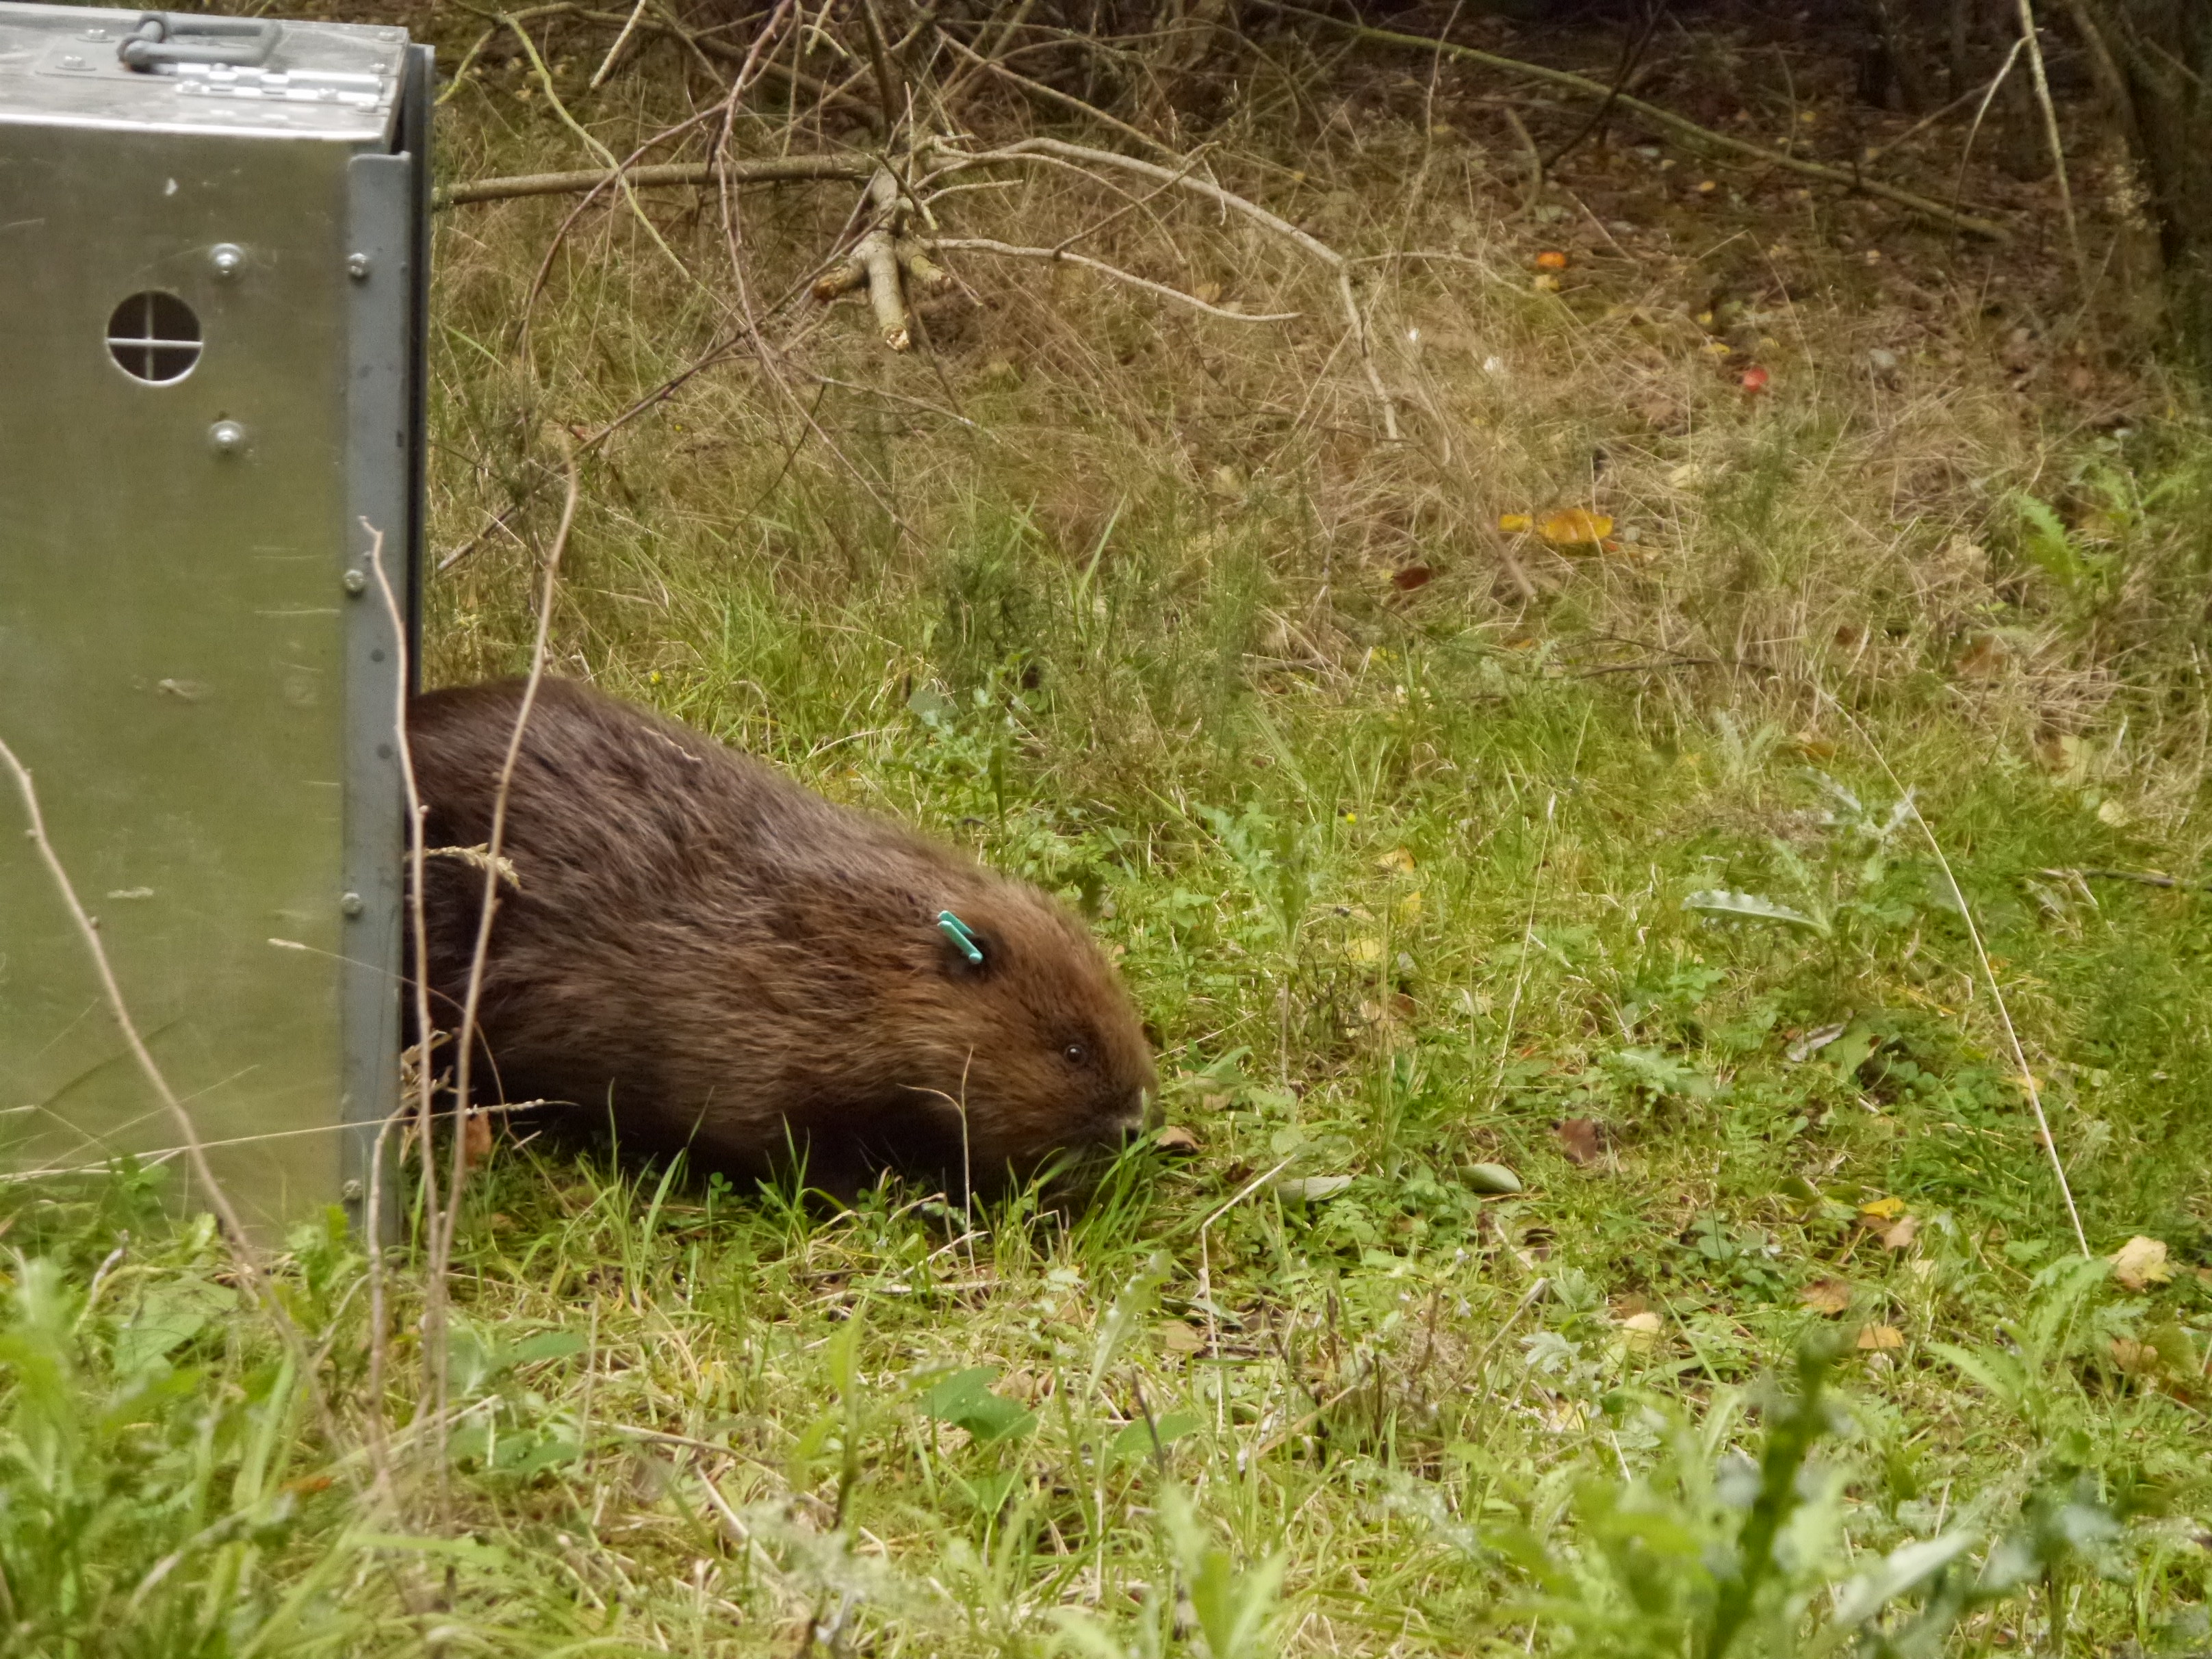 The two beavers were brought from Scotland and released in the enclosure in Norfolk (Wild Ken Hill)